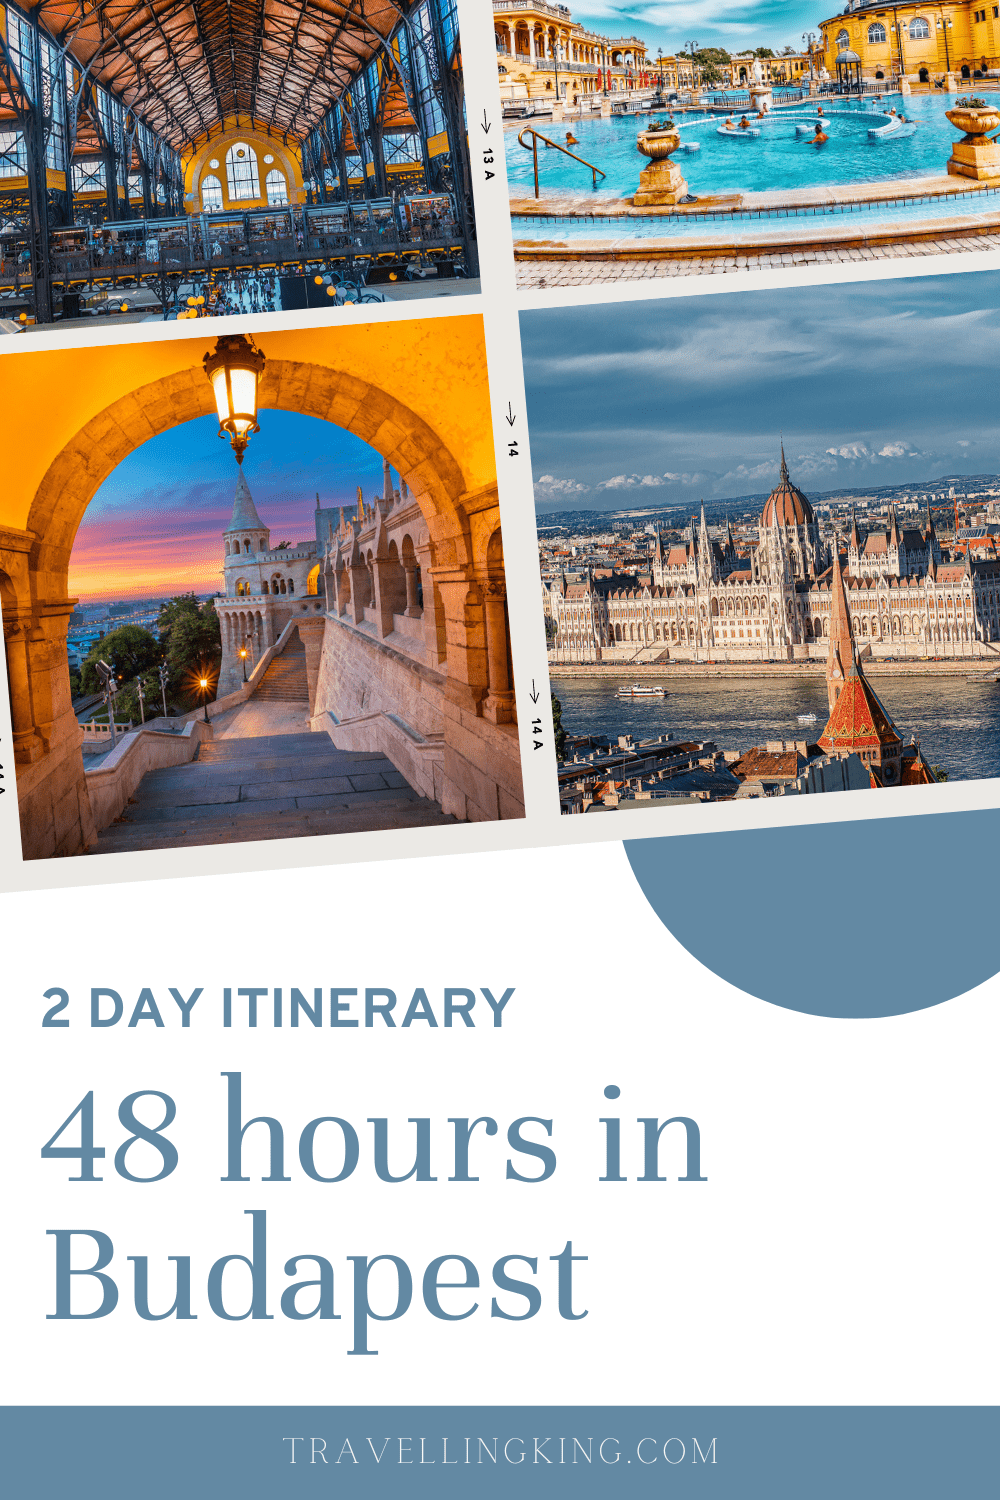 48 hours in Budapest - 2 Day Itinerary